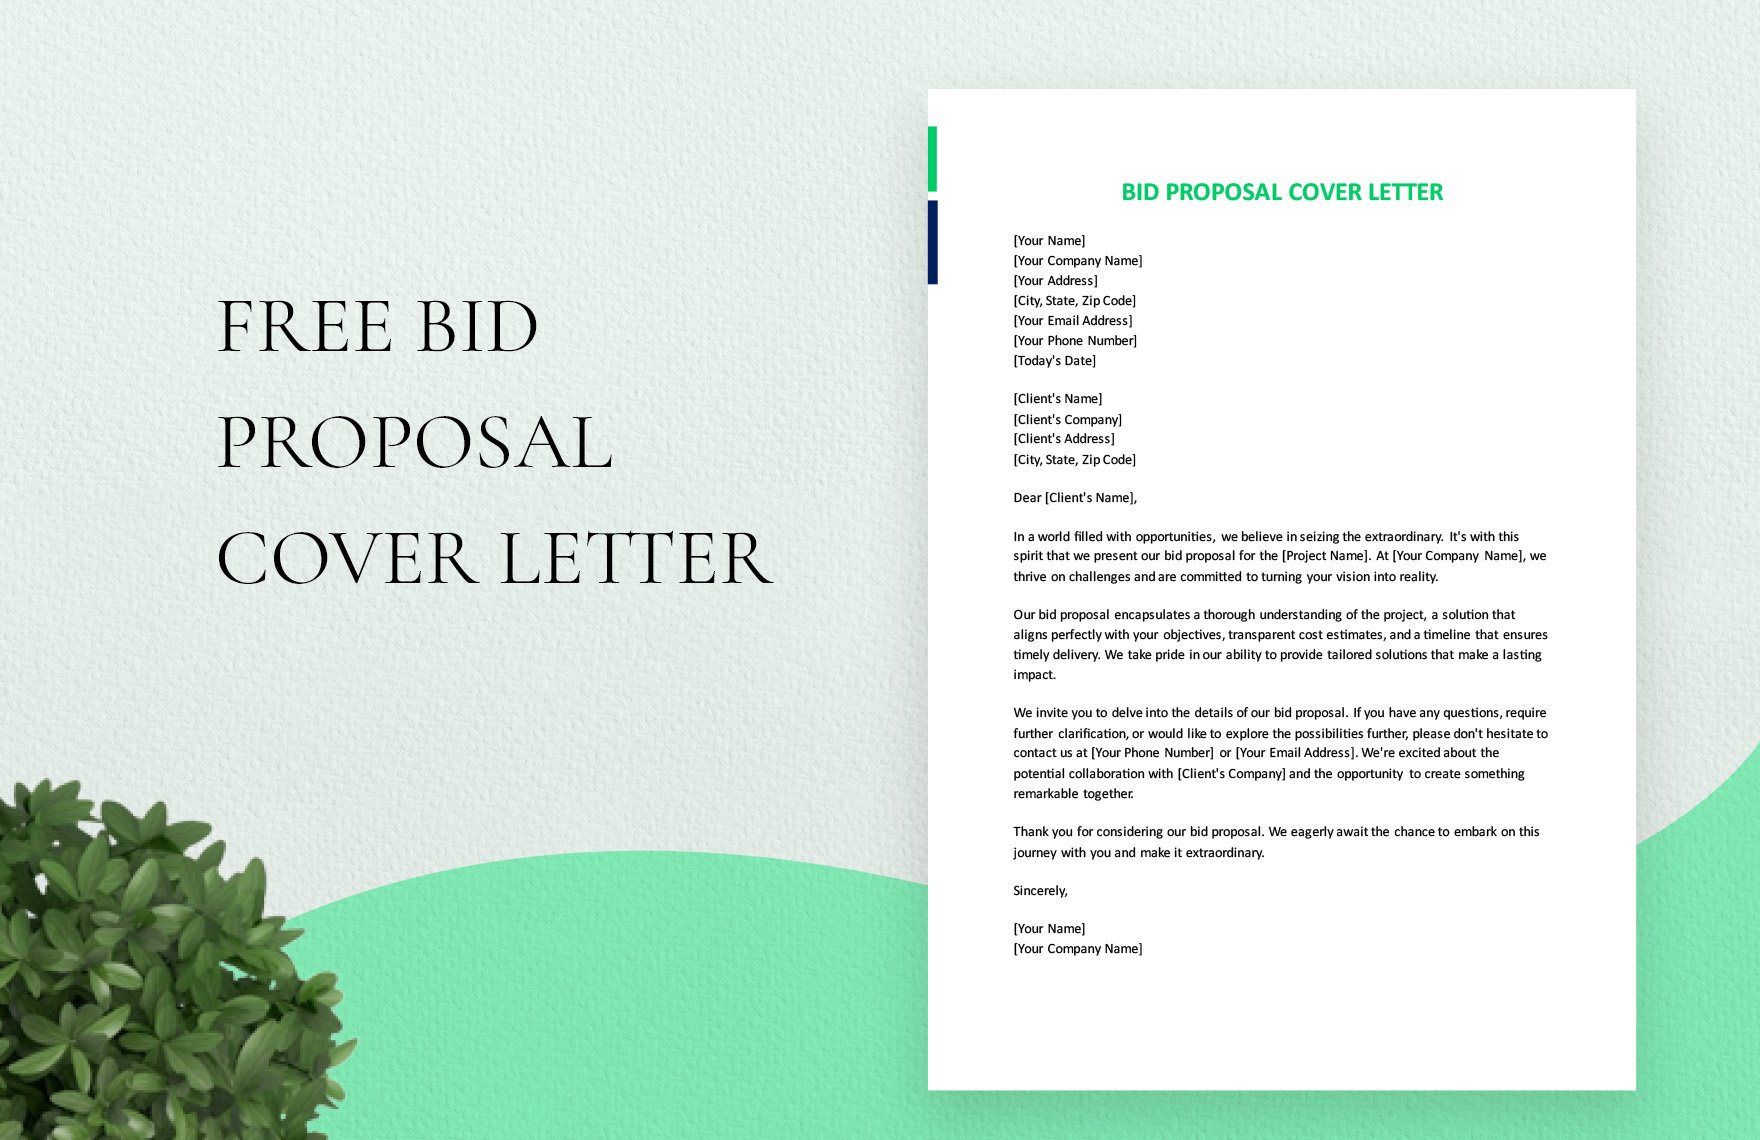 Free Bid Proposal Cover Letter in Word, Google Docs, PDF